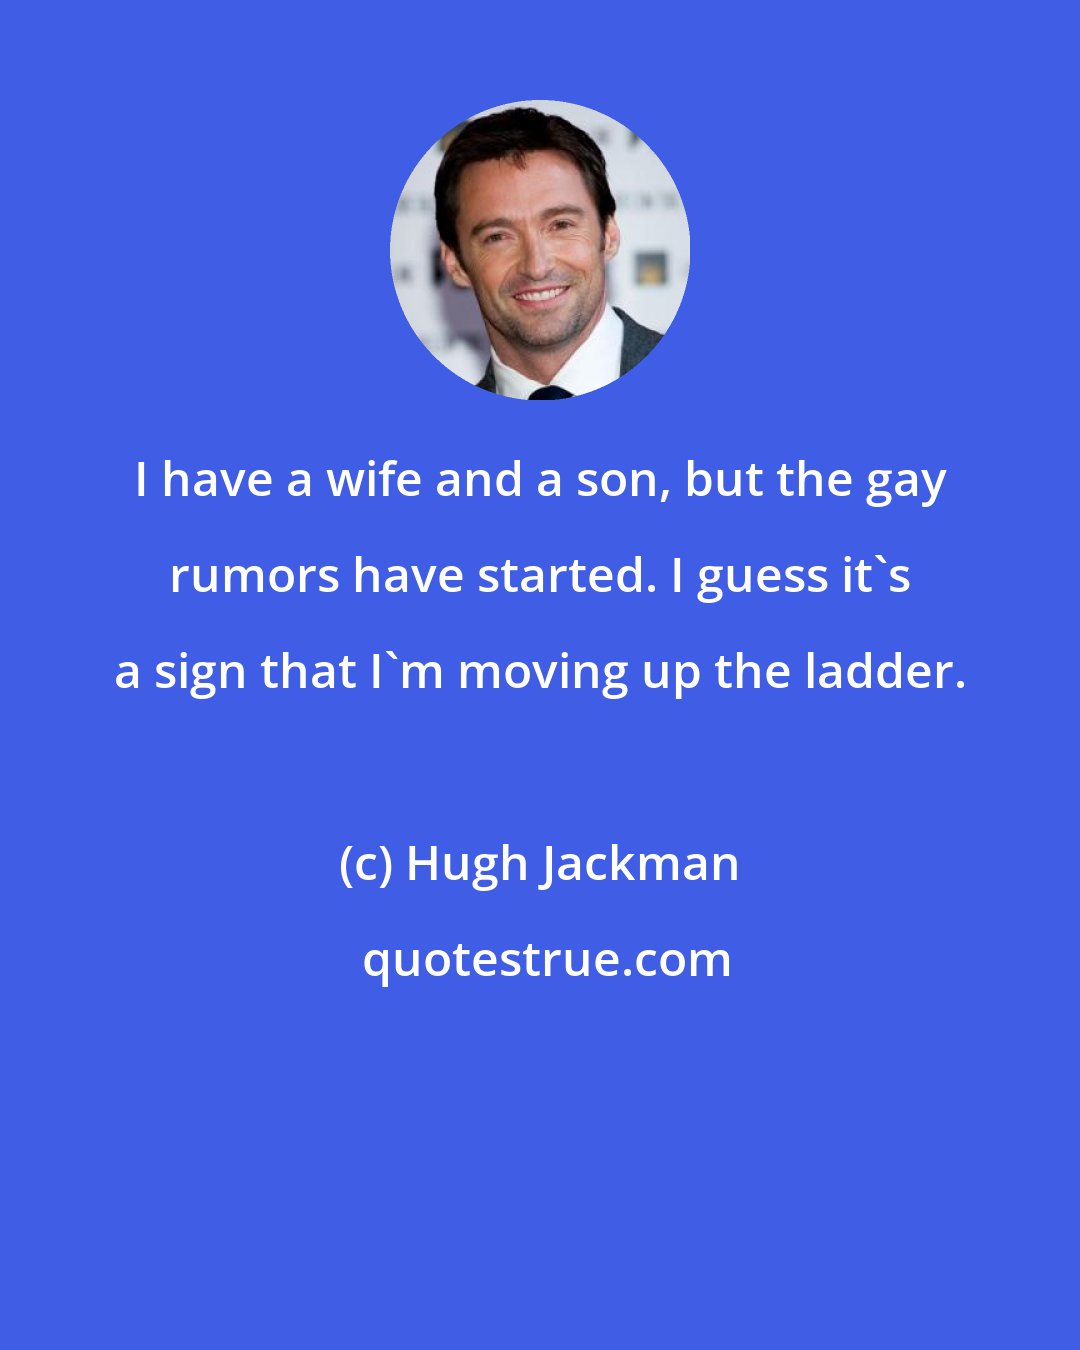 Hugh Jackman: I have a wife and a son, but the gay rumors have started. I guess it's a sign that I'm moving up the ladder.